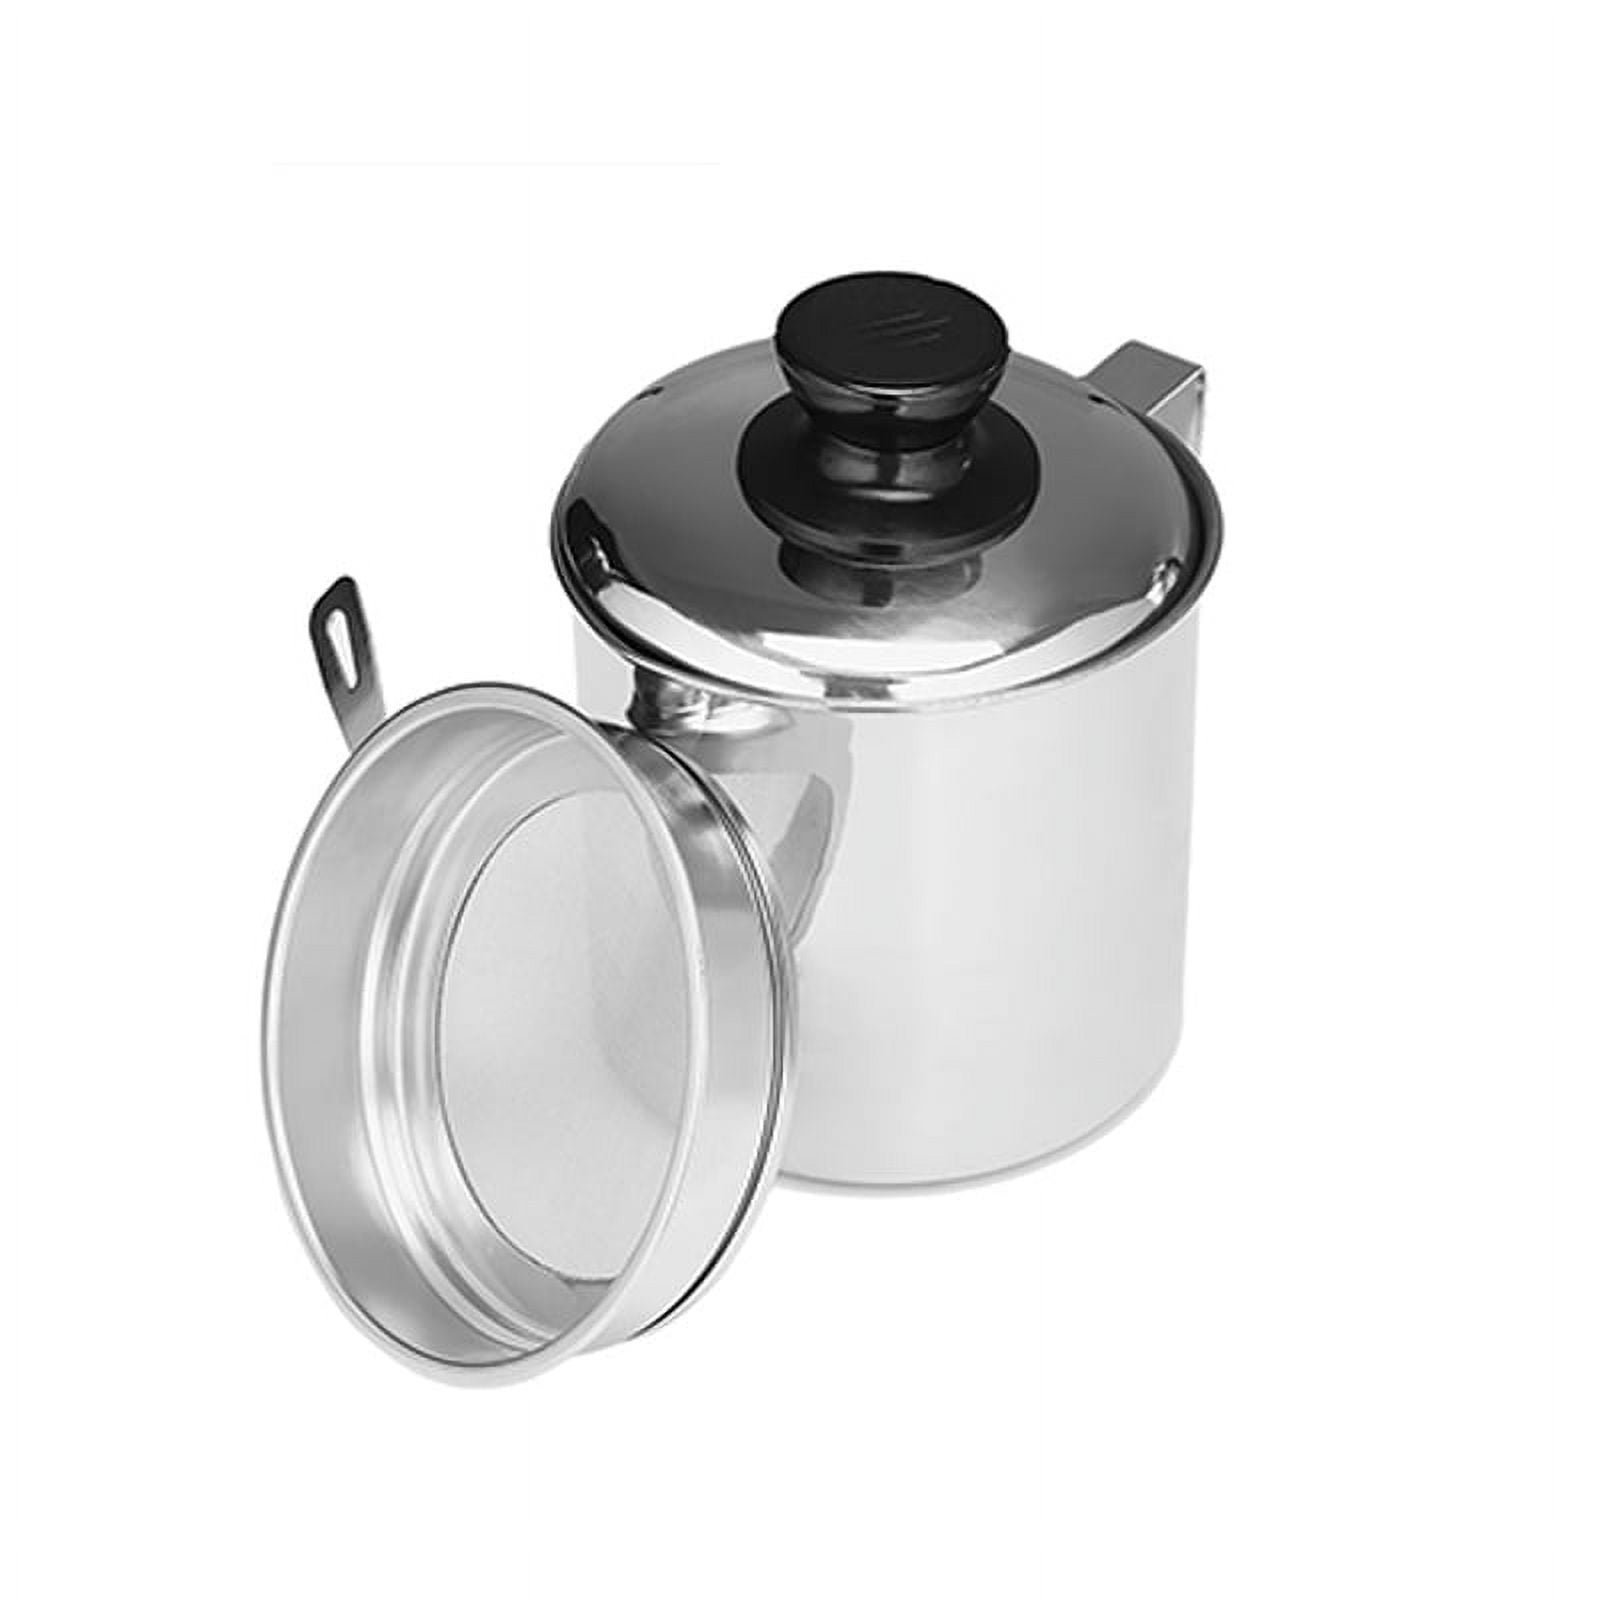 Cook N Home Speciality Oil Grease Storage Can with strainer, 3.5 quarts,  Steel,2651